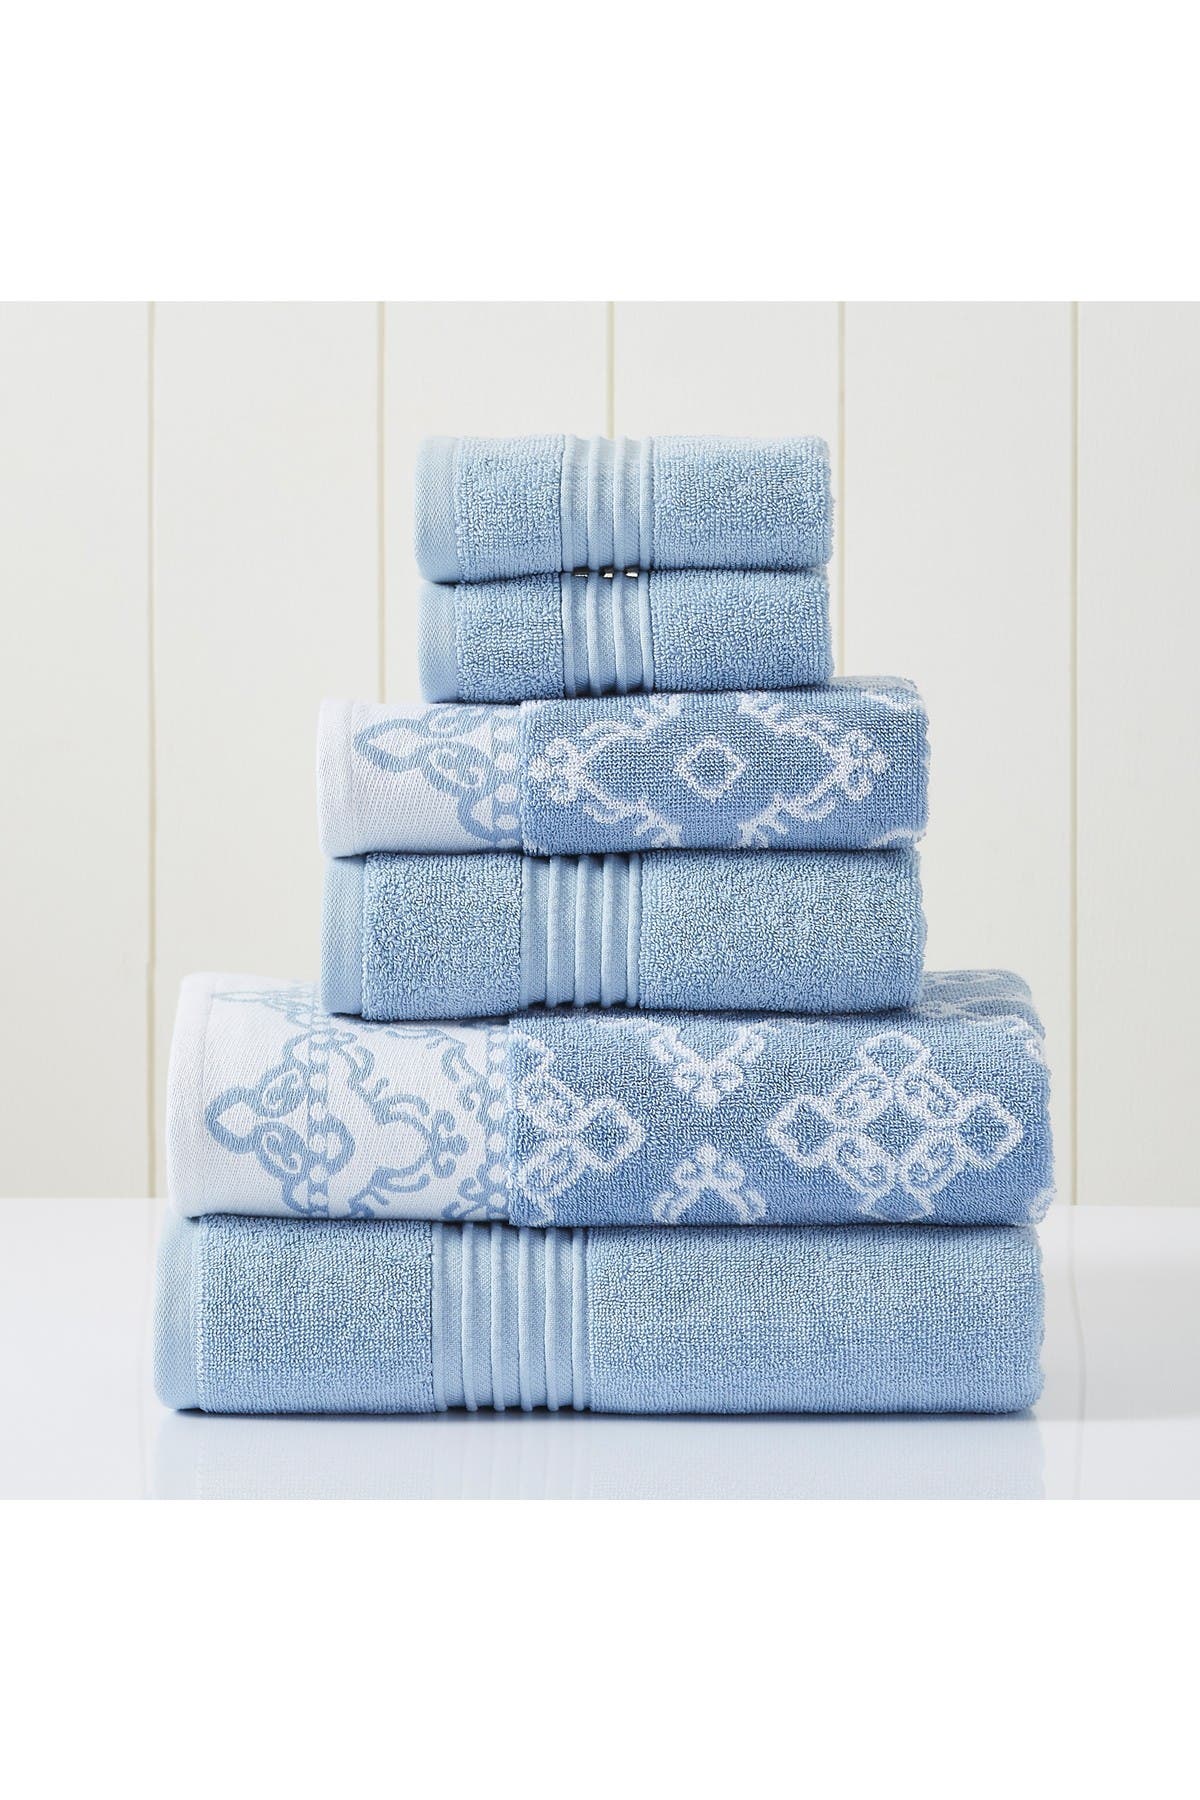 Modern Threads Yarn Dyed Jacquard/solid Towel 6-piece Set In Blue